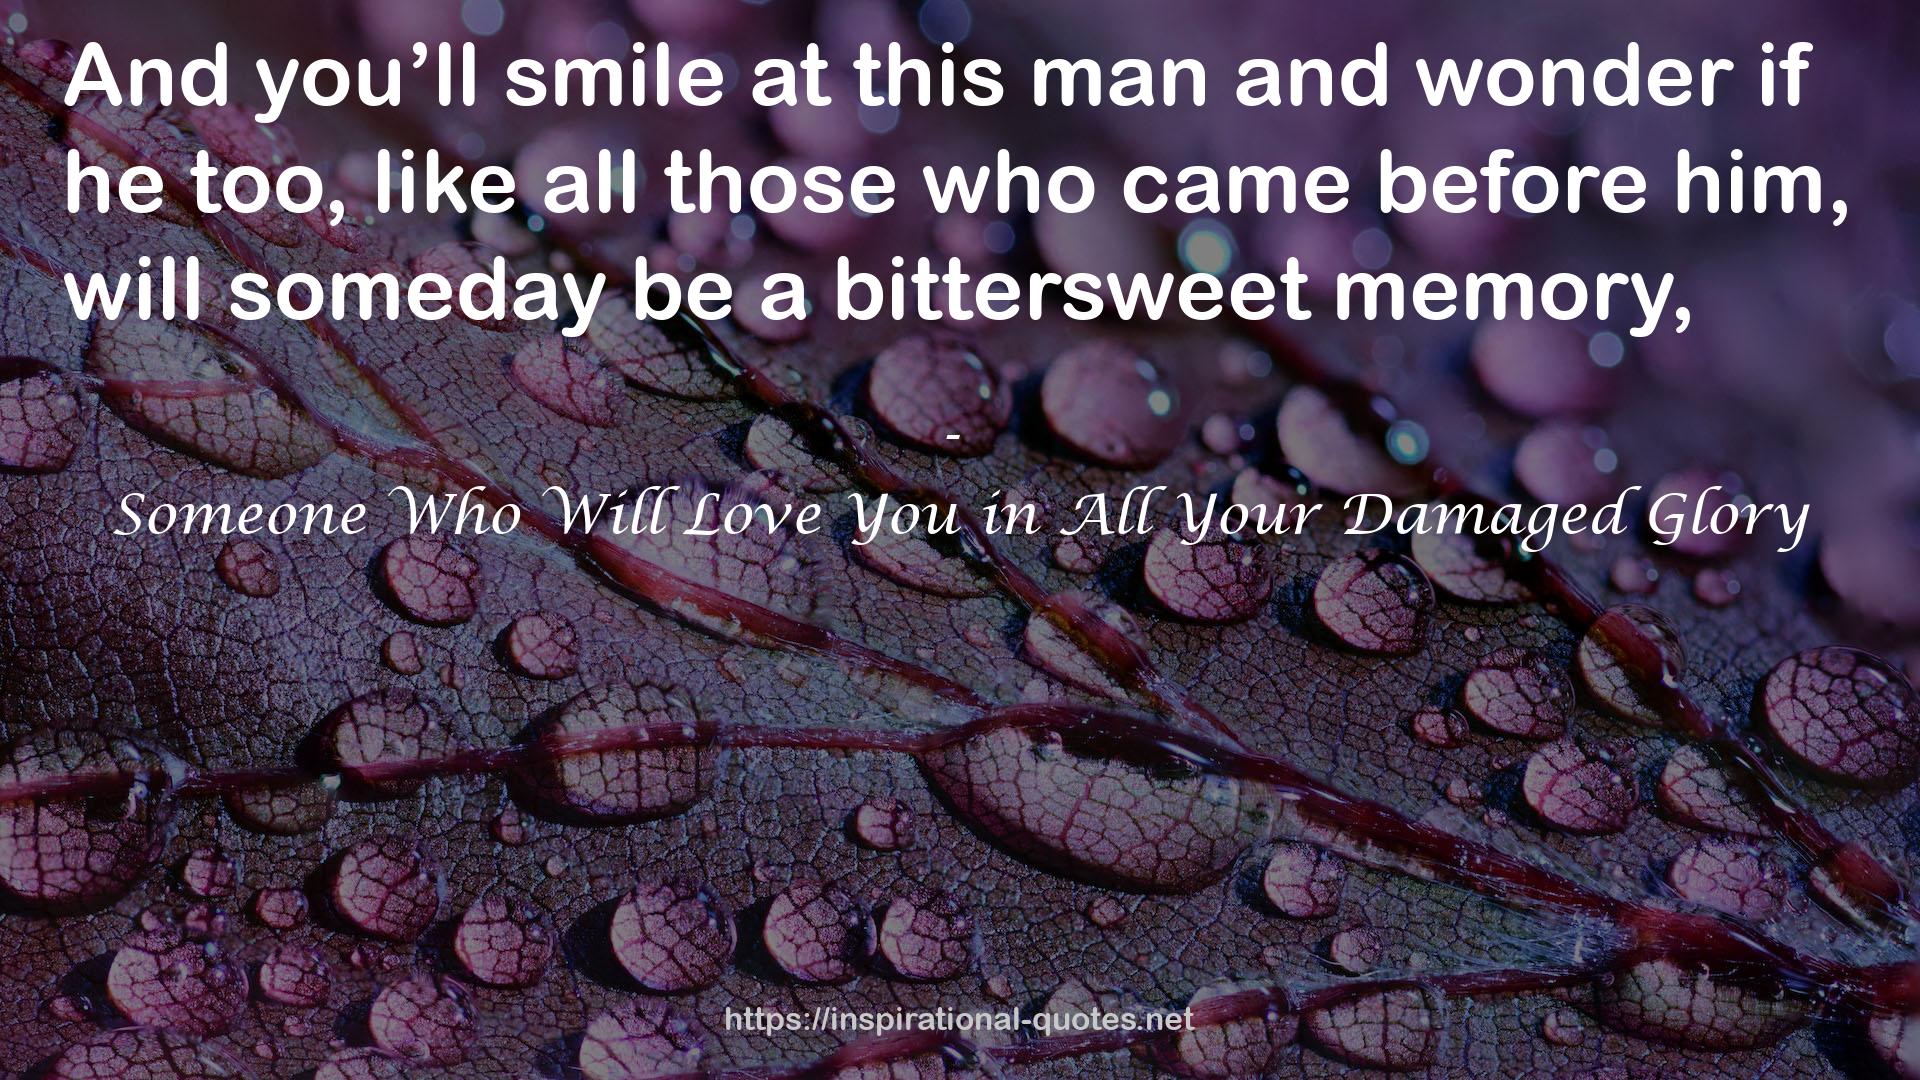 Someone Who Will Love You in All Your Damaged Glory QUOTES